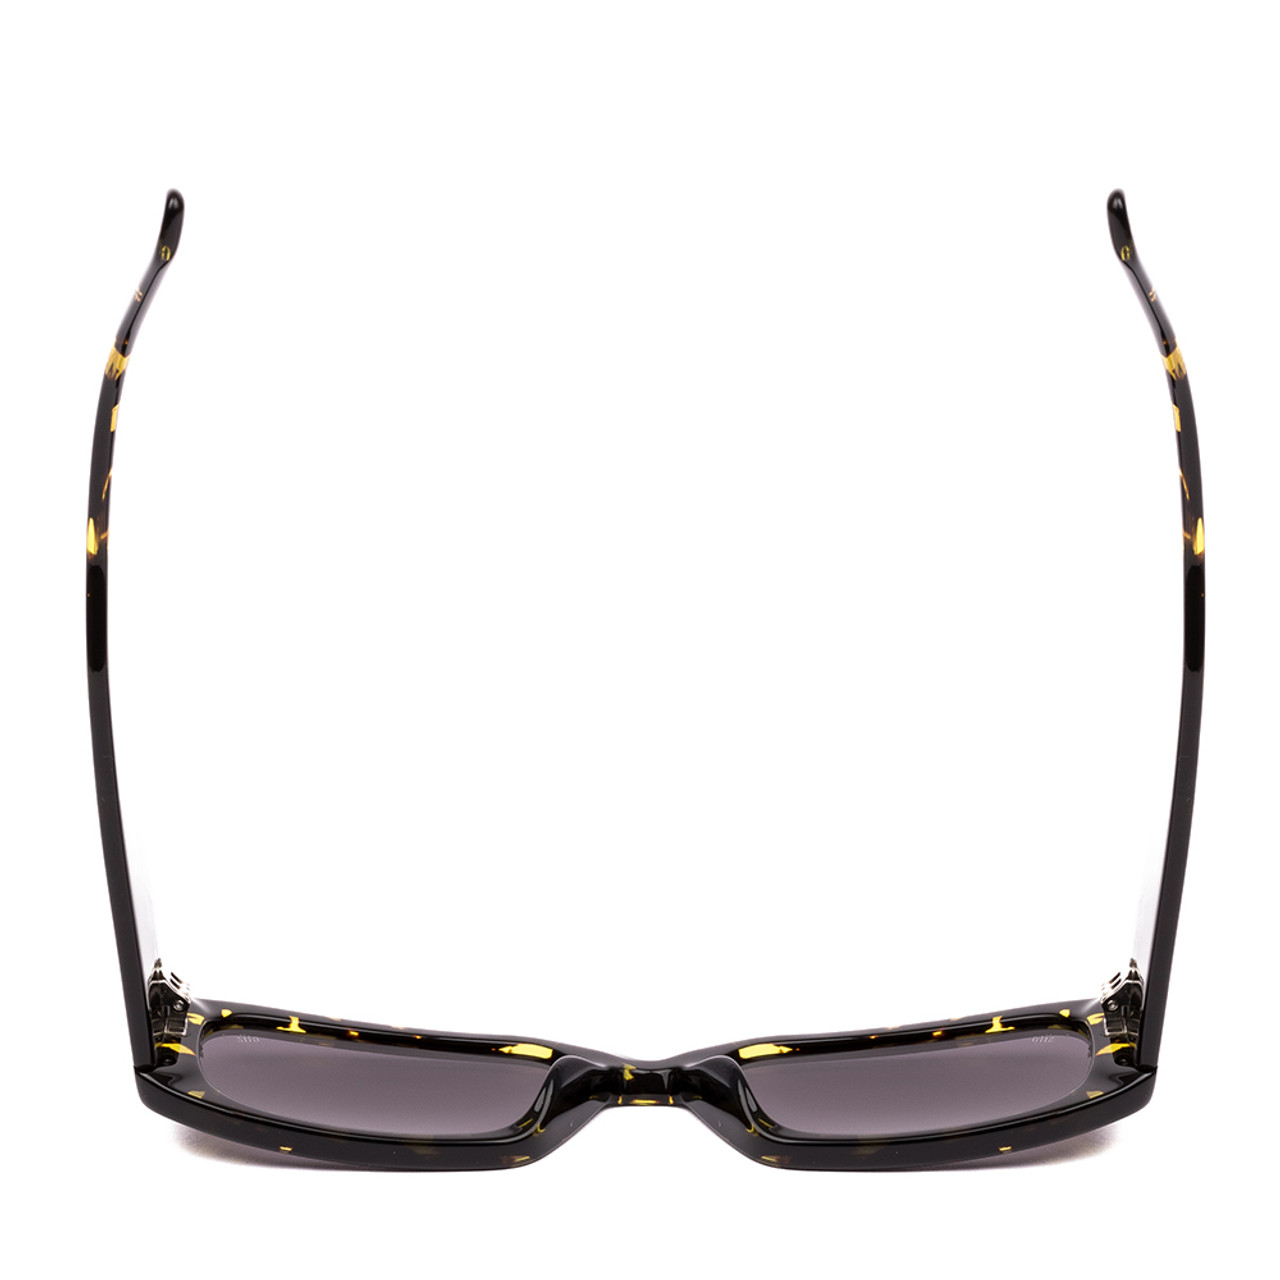 Top View of SITO SHADES ELECTRO VISION Unisex Sunglass Black Yellow Tortoise/Iron Gray 56 mm